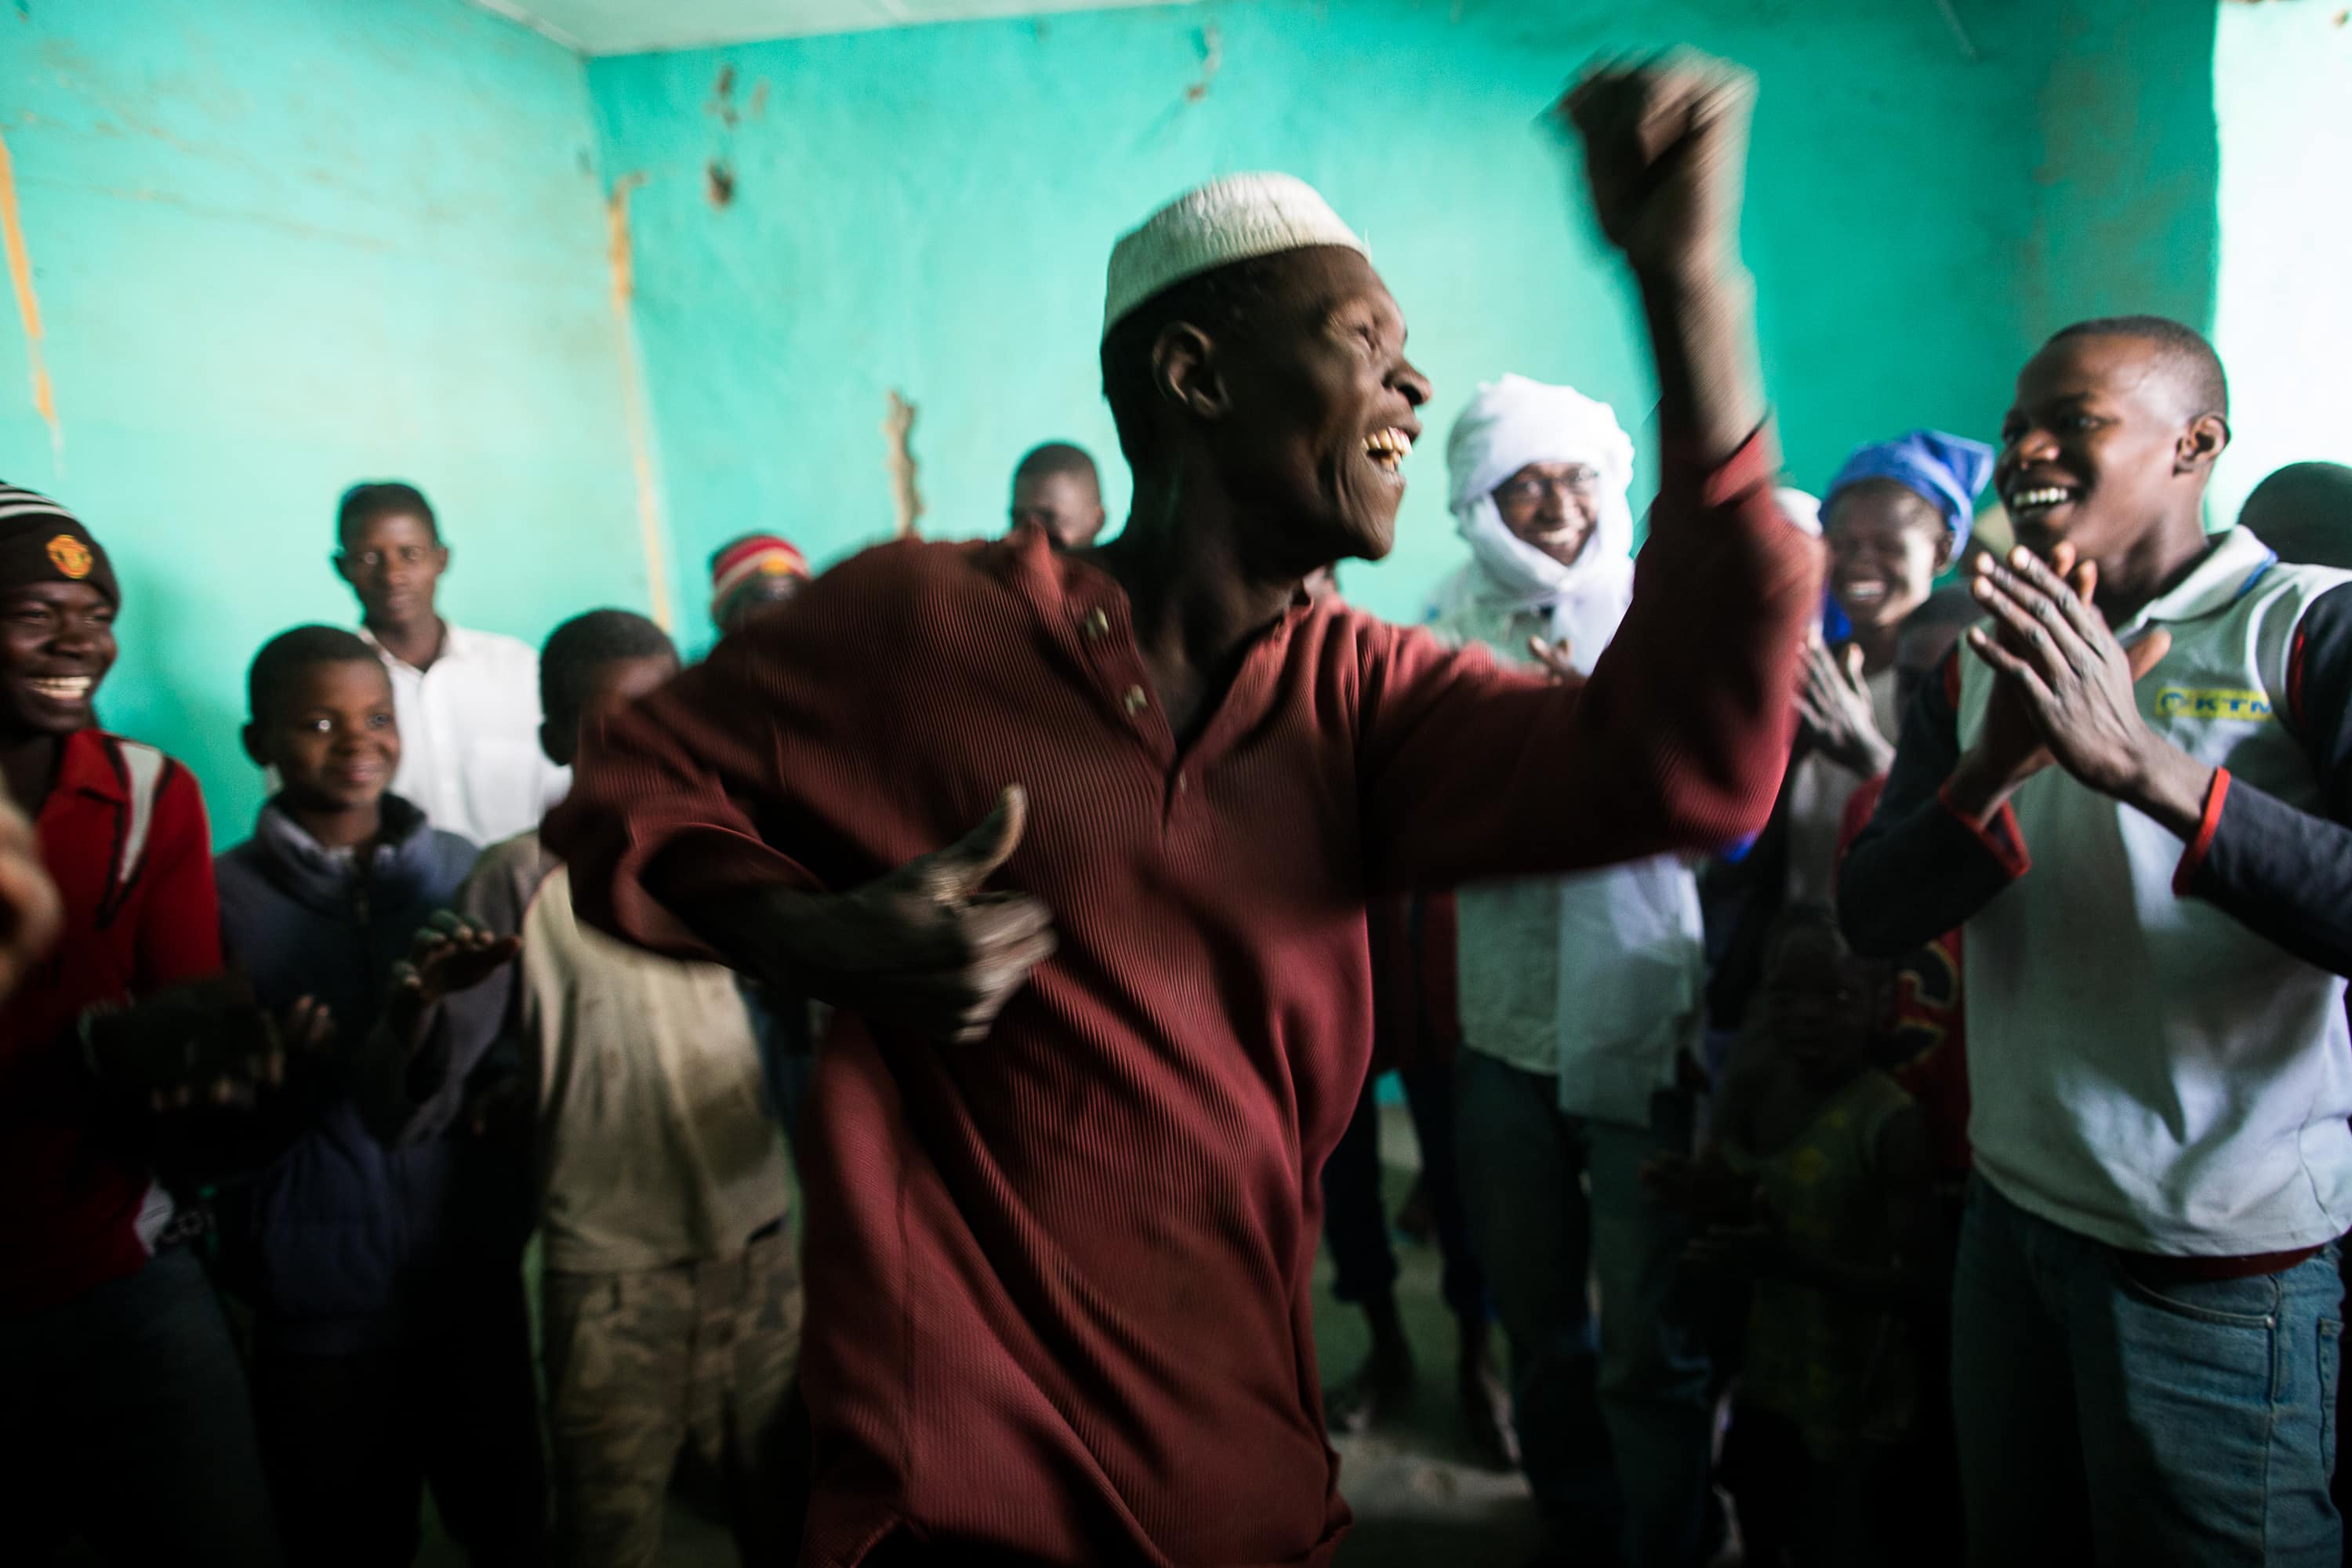 Youths dance in an improvised disco in the centre of Timbuktu, Mali, on 1 February 2013, after months of music being banned, Trevor Snapp/CORBIS/APImages